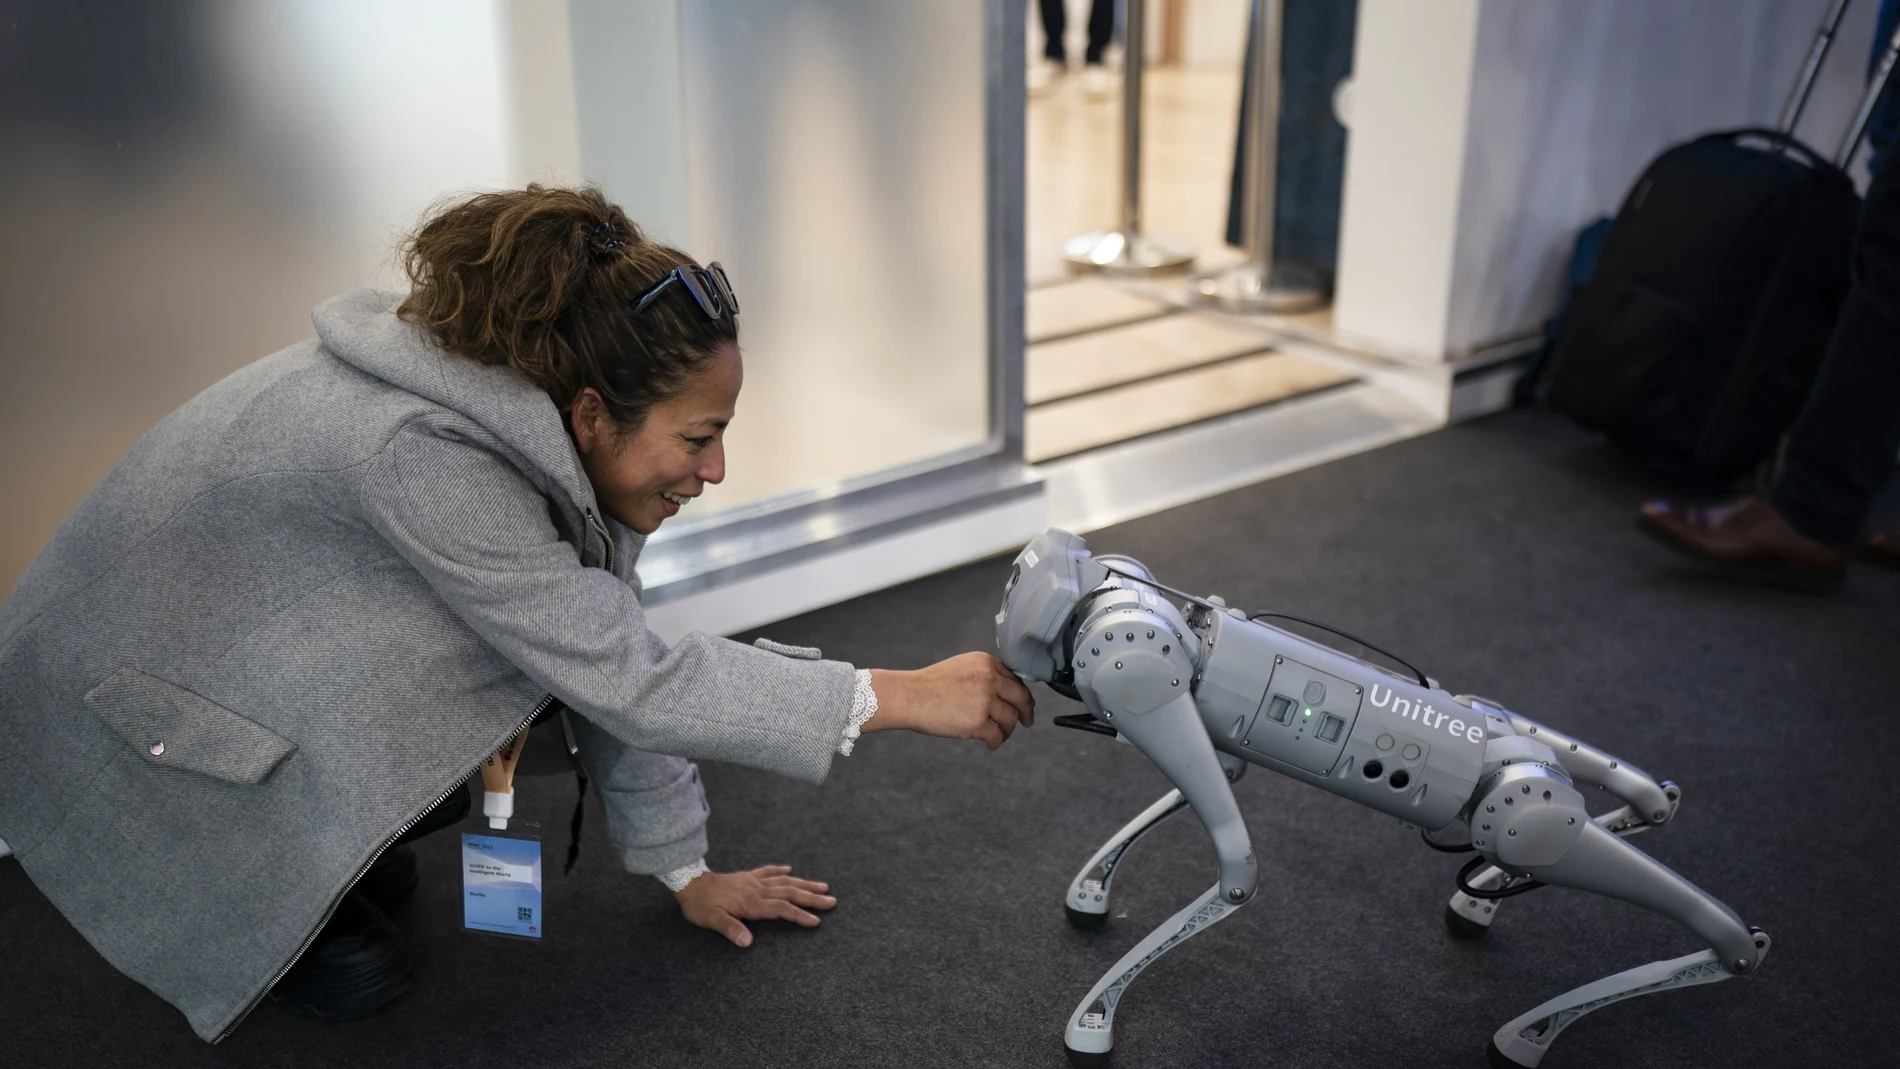 A visitor touches Unitree GO1 ''dog'' robot during the Mobile World Congress 2023 in Barcelona, Spain.